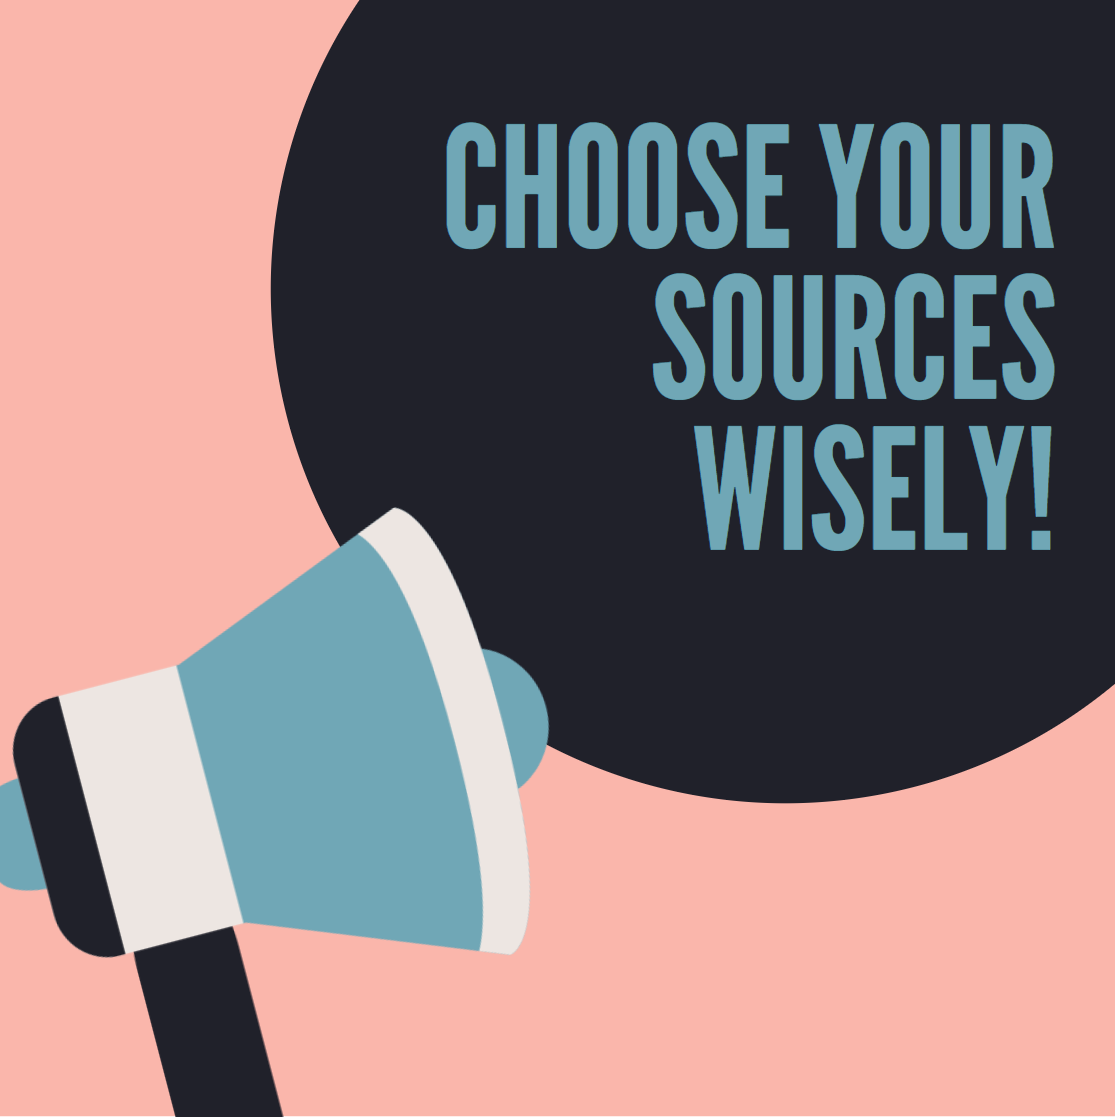 Look to Trustworthy News Sources for COVID-19 Updates